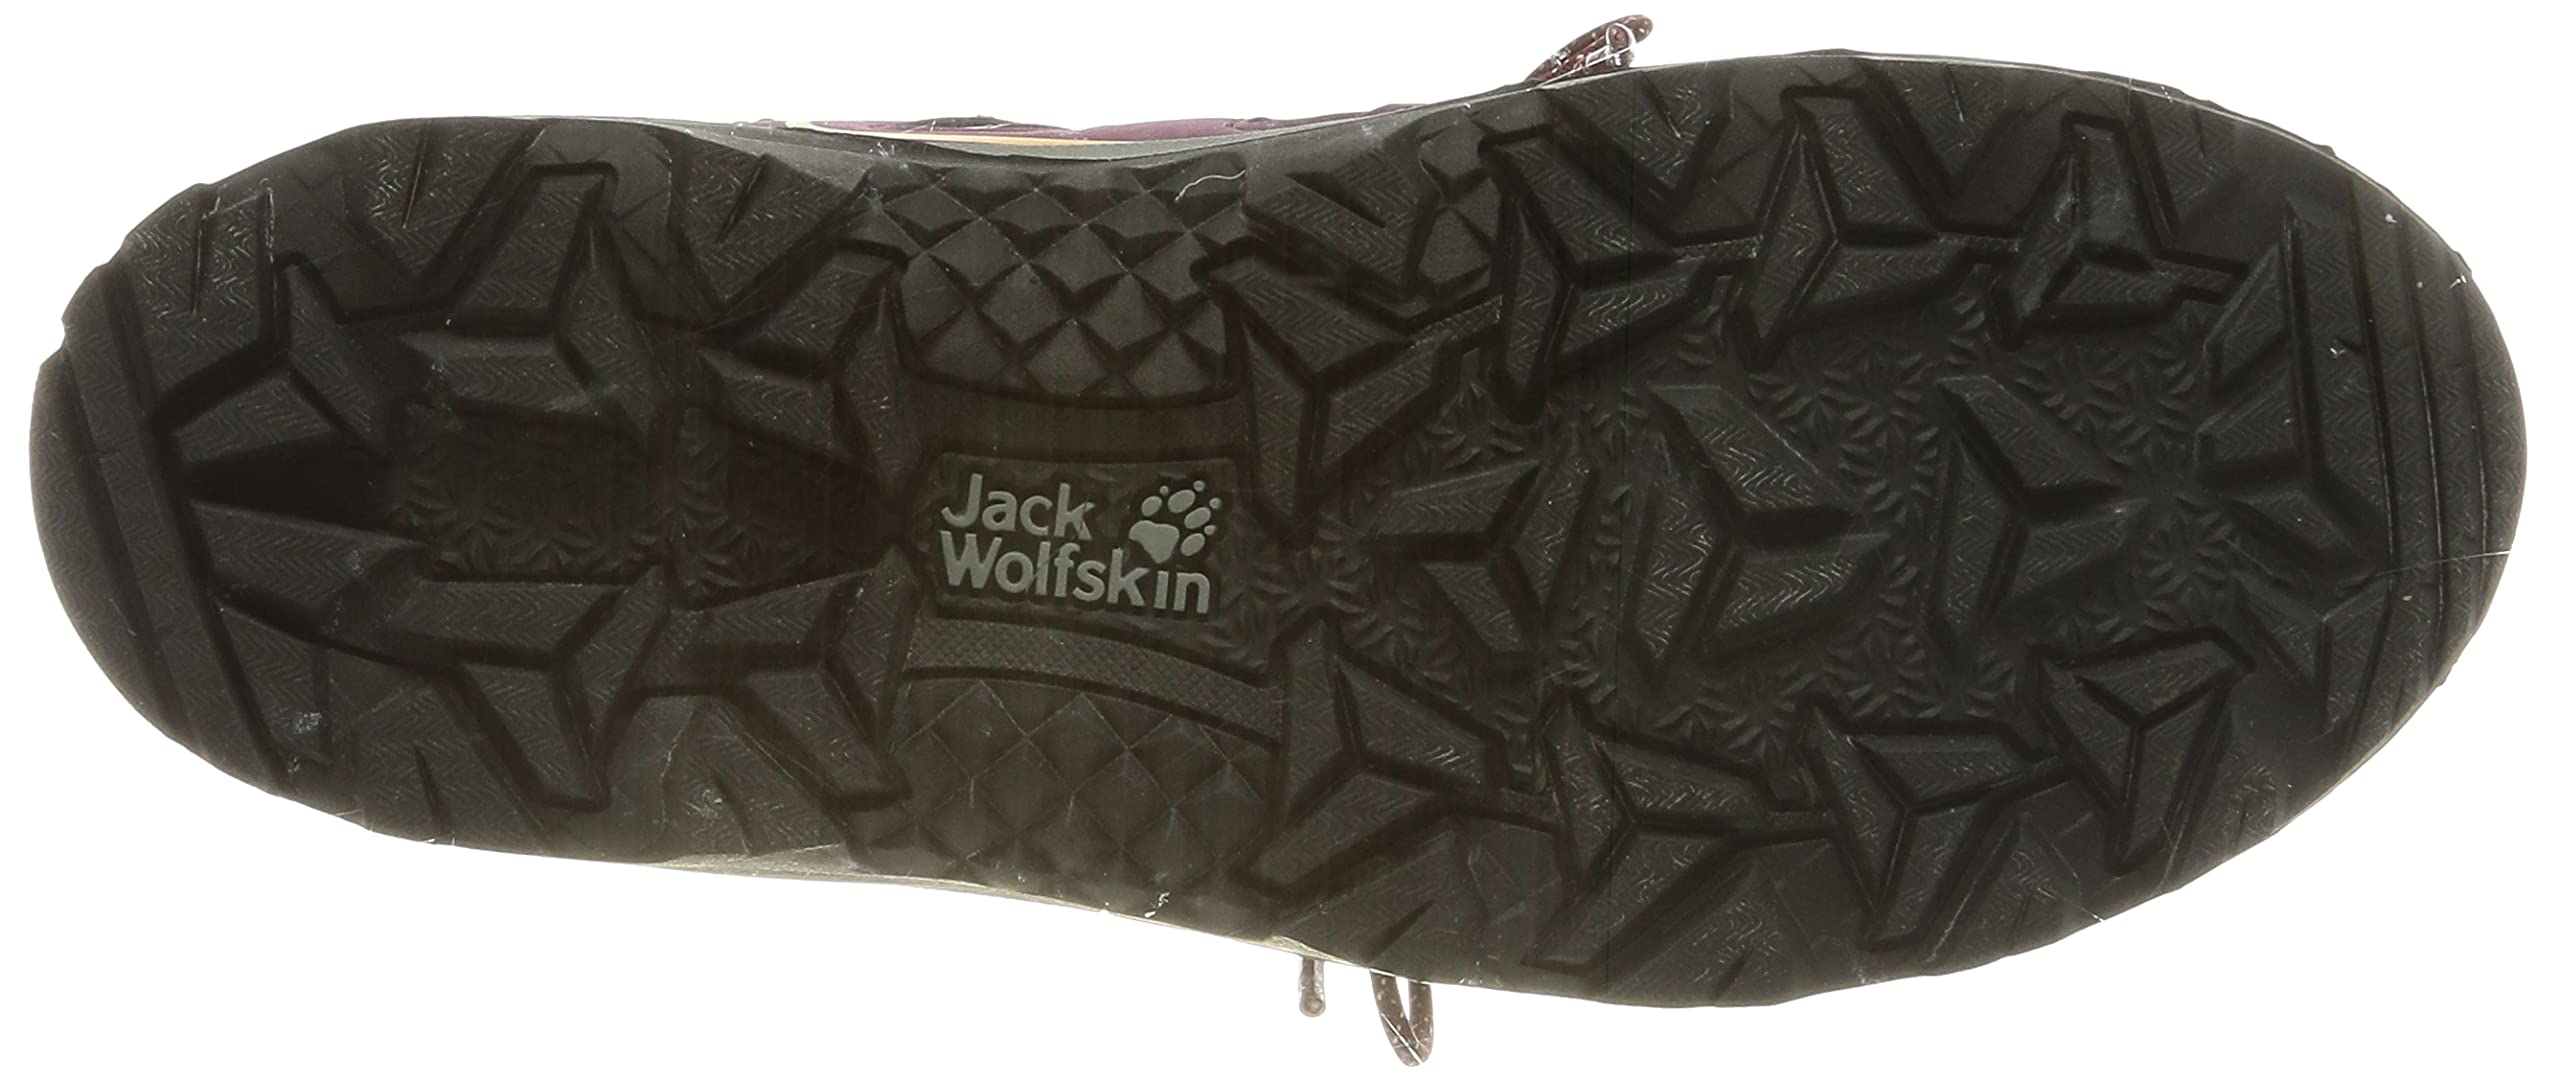 Jack Wolfskin Boy's High Rise Hiking Shoes Walking Boots